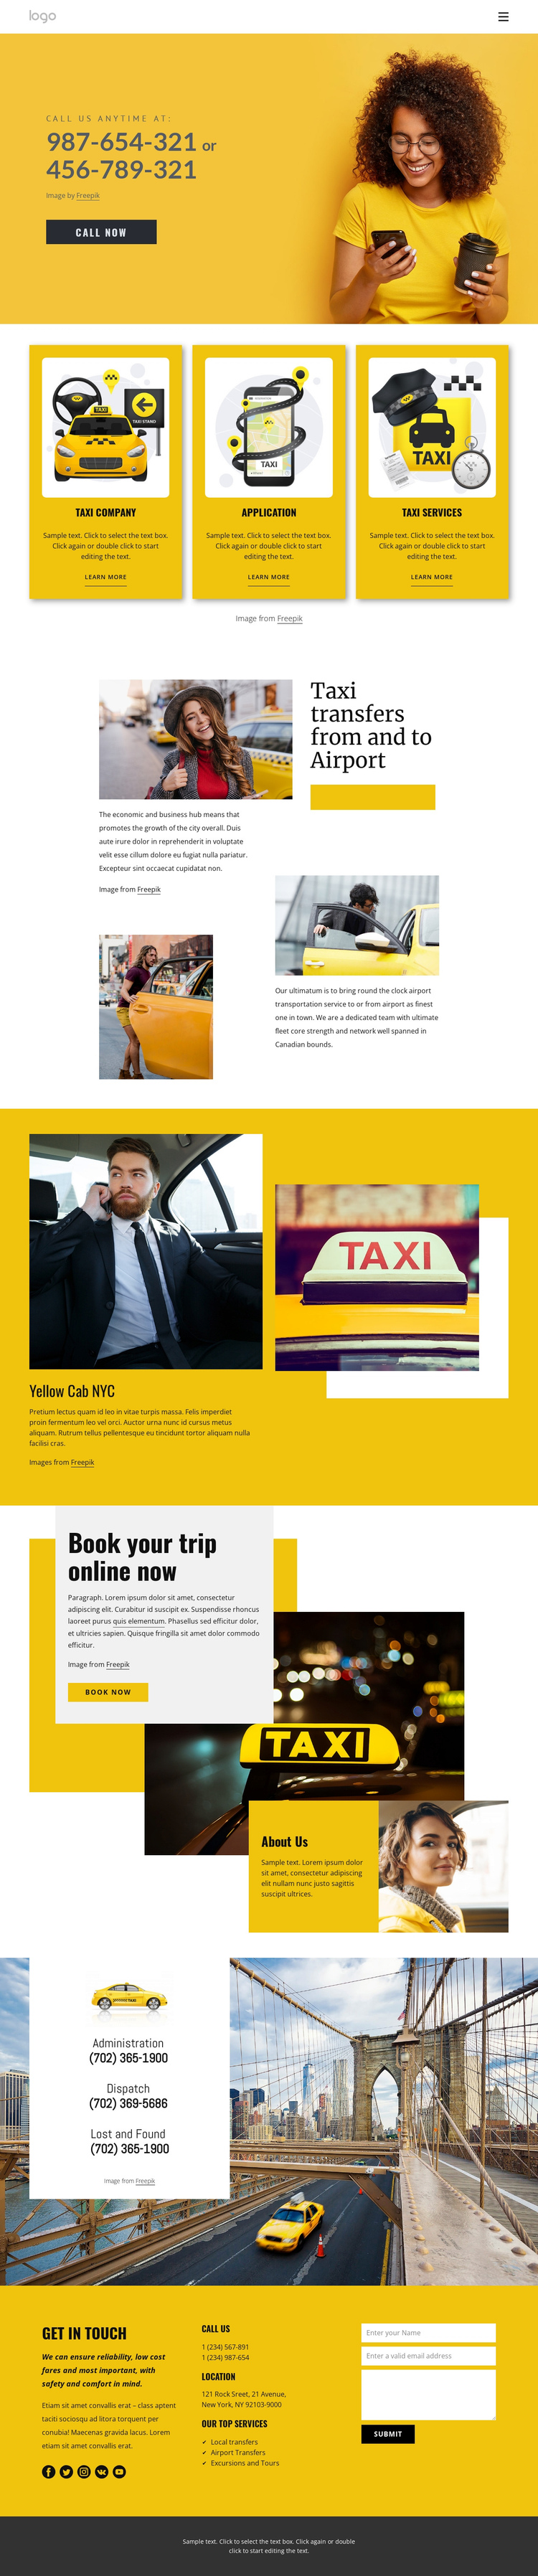 Quality taxi service Website Builder Software